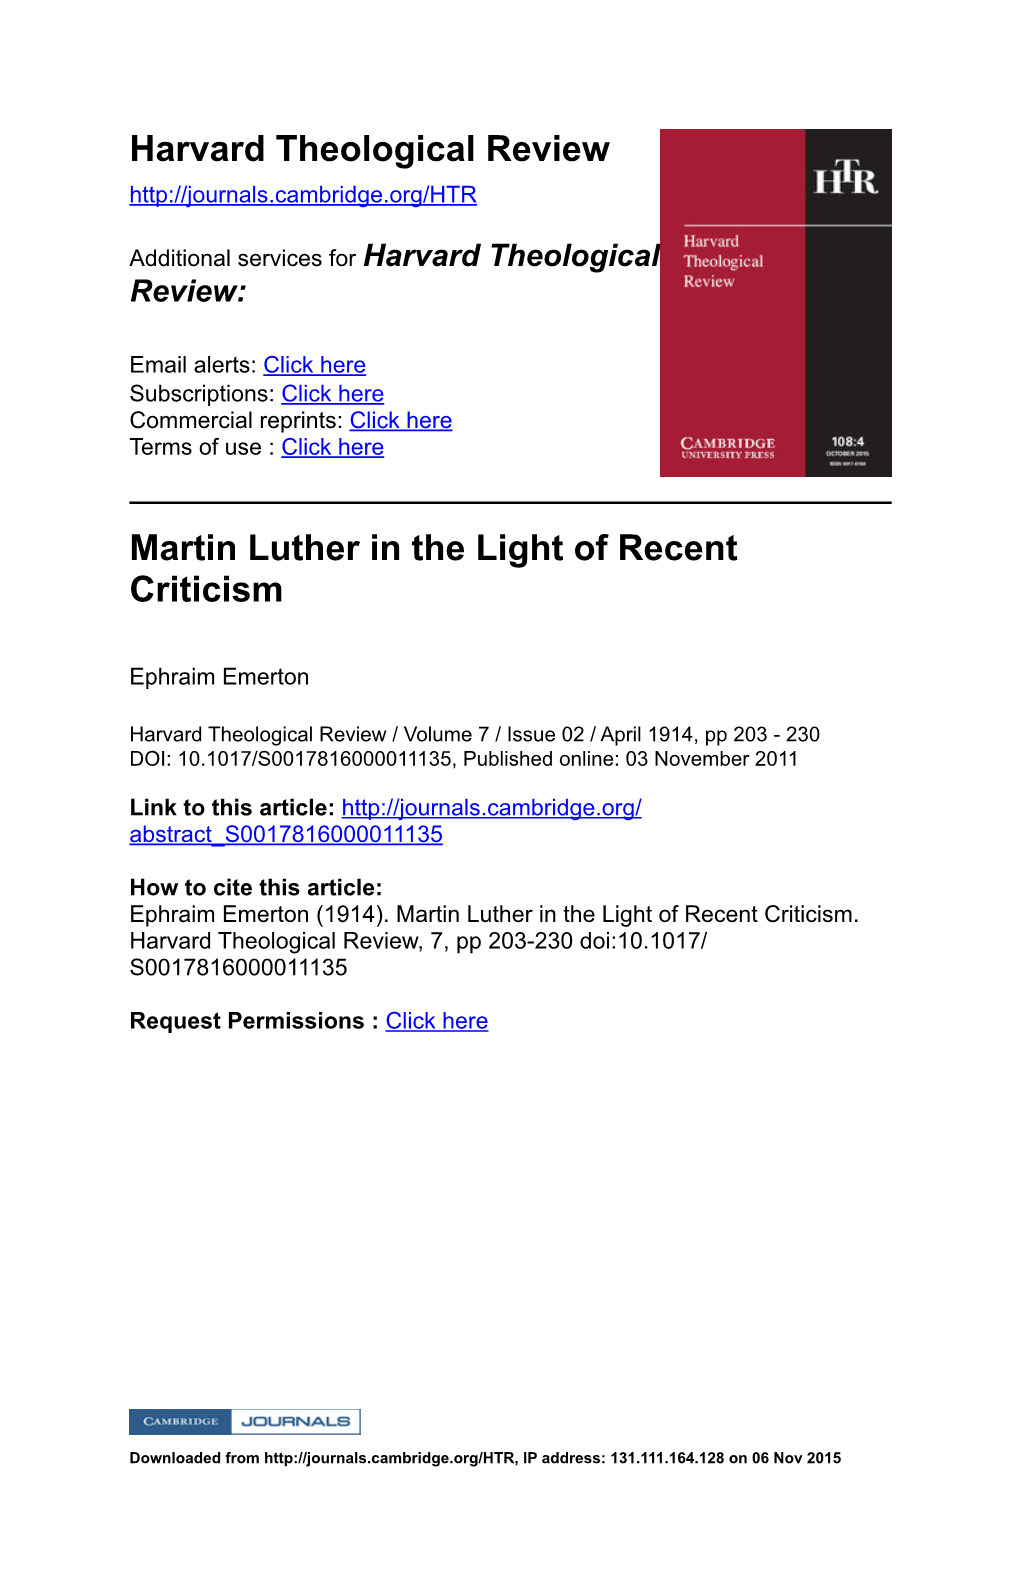 Harvard Theological Review Martin Luther in the Light of Recent Criticism